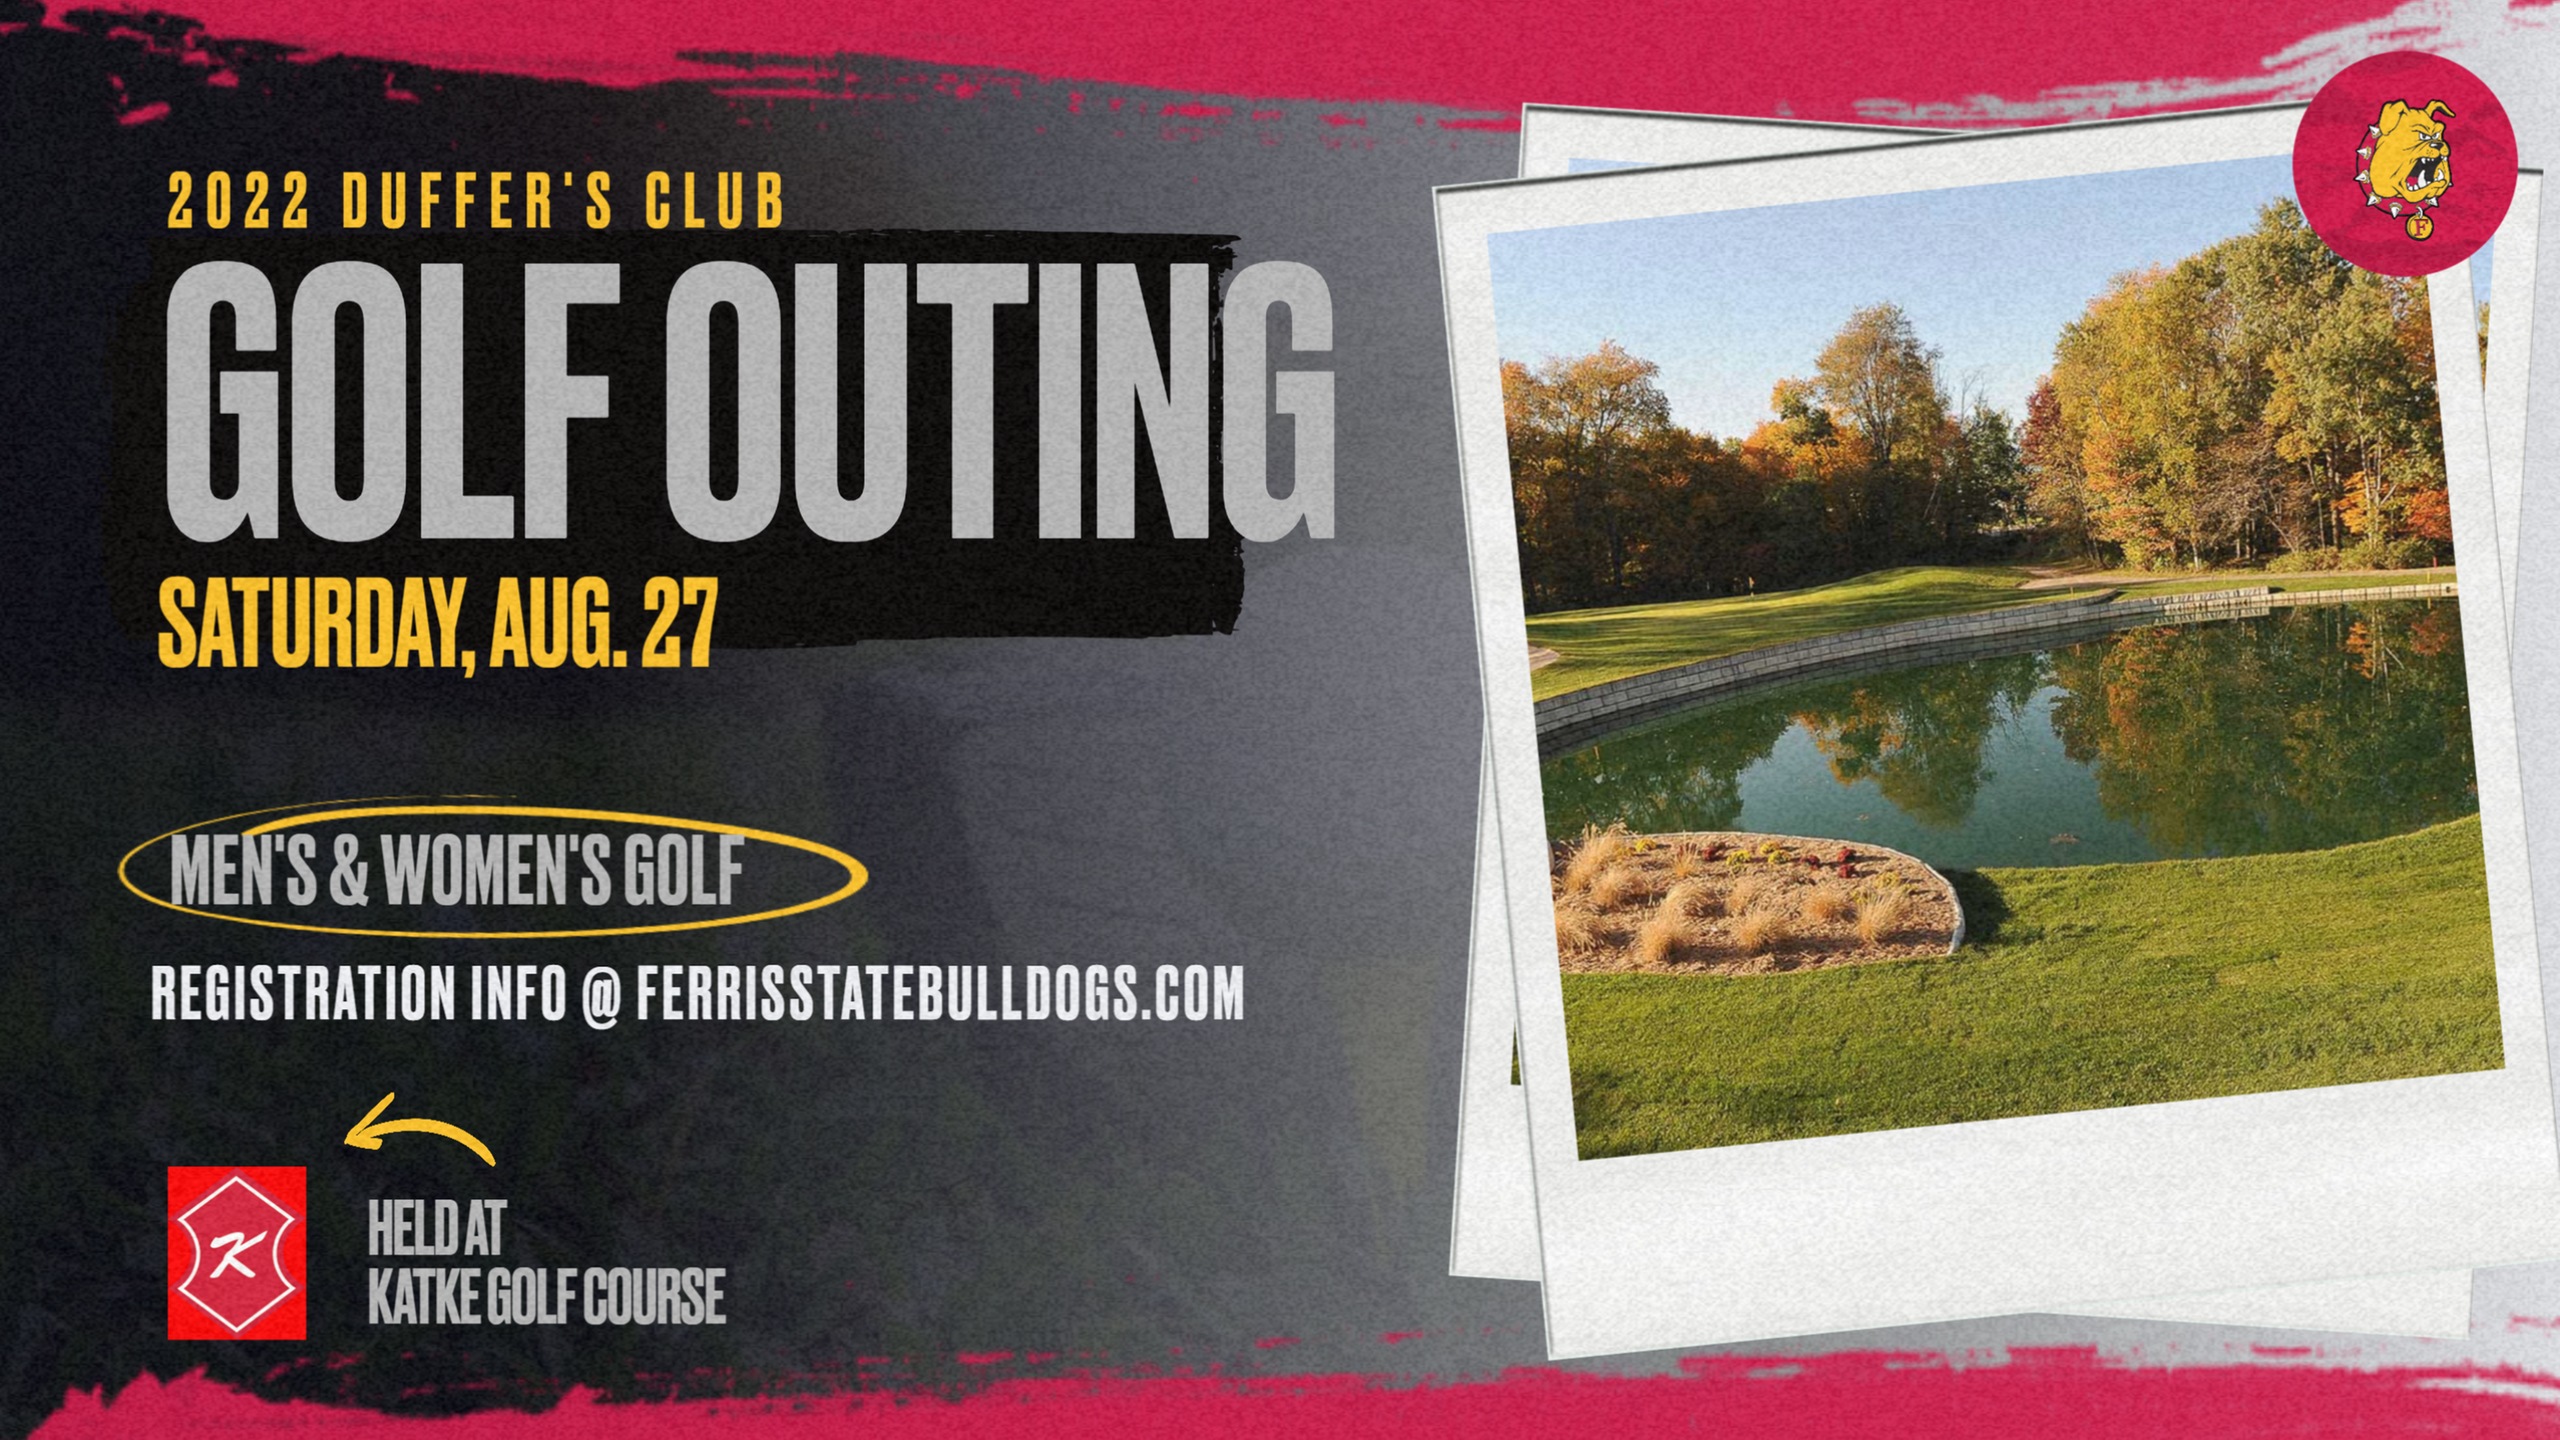 Registration Open For 2022 Duffer's Club Outing Supporting Men's and Women's Golf Programs